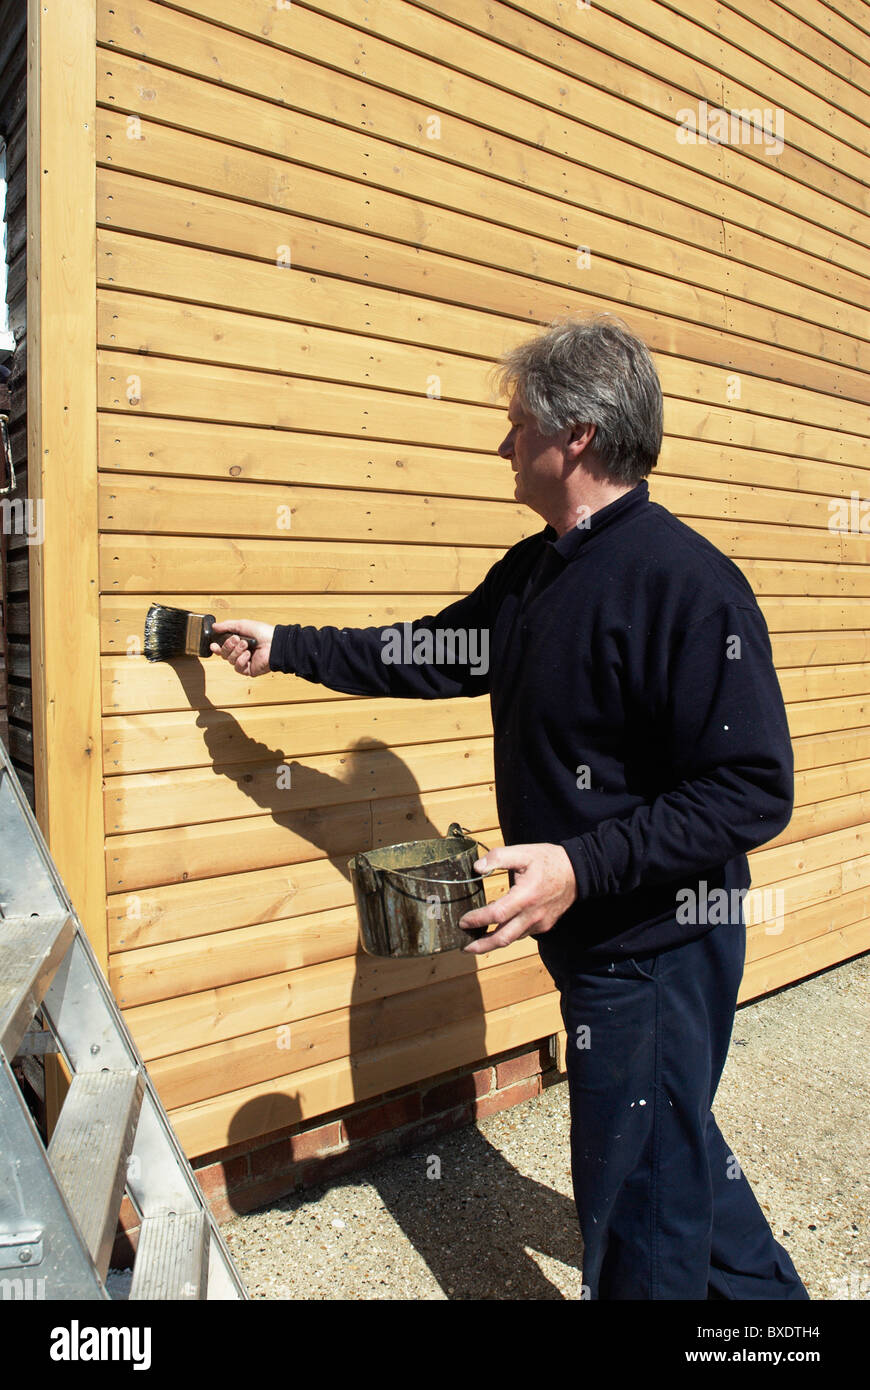 Wood staining weatherboarding on the side of a building Stock Photo